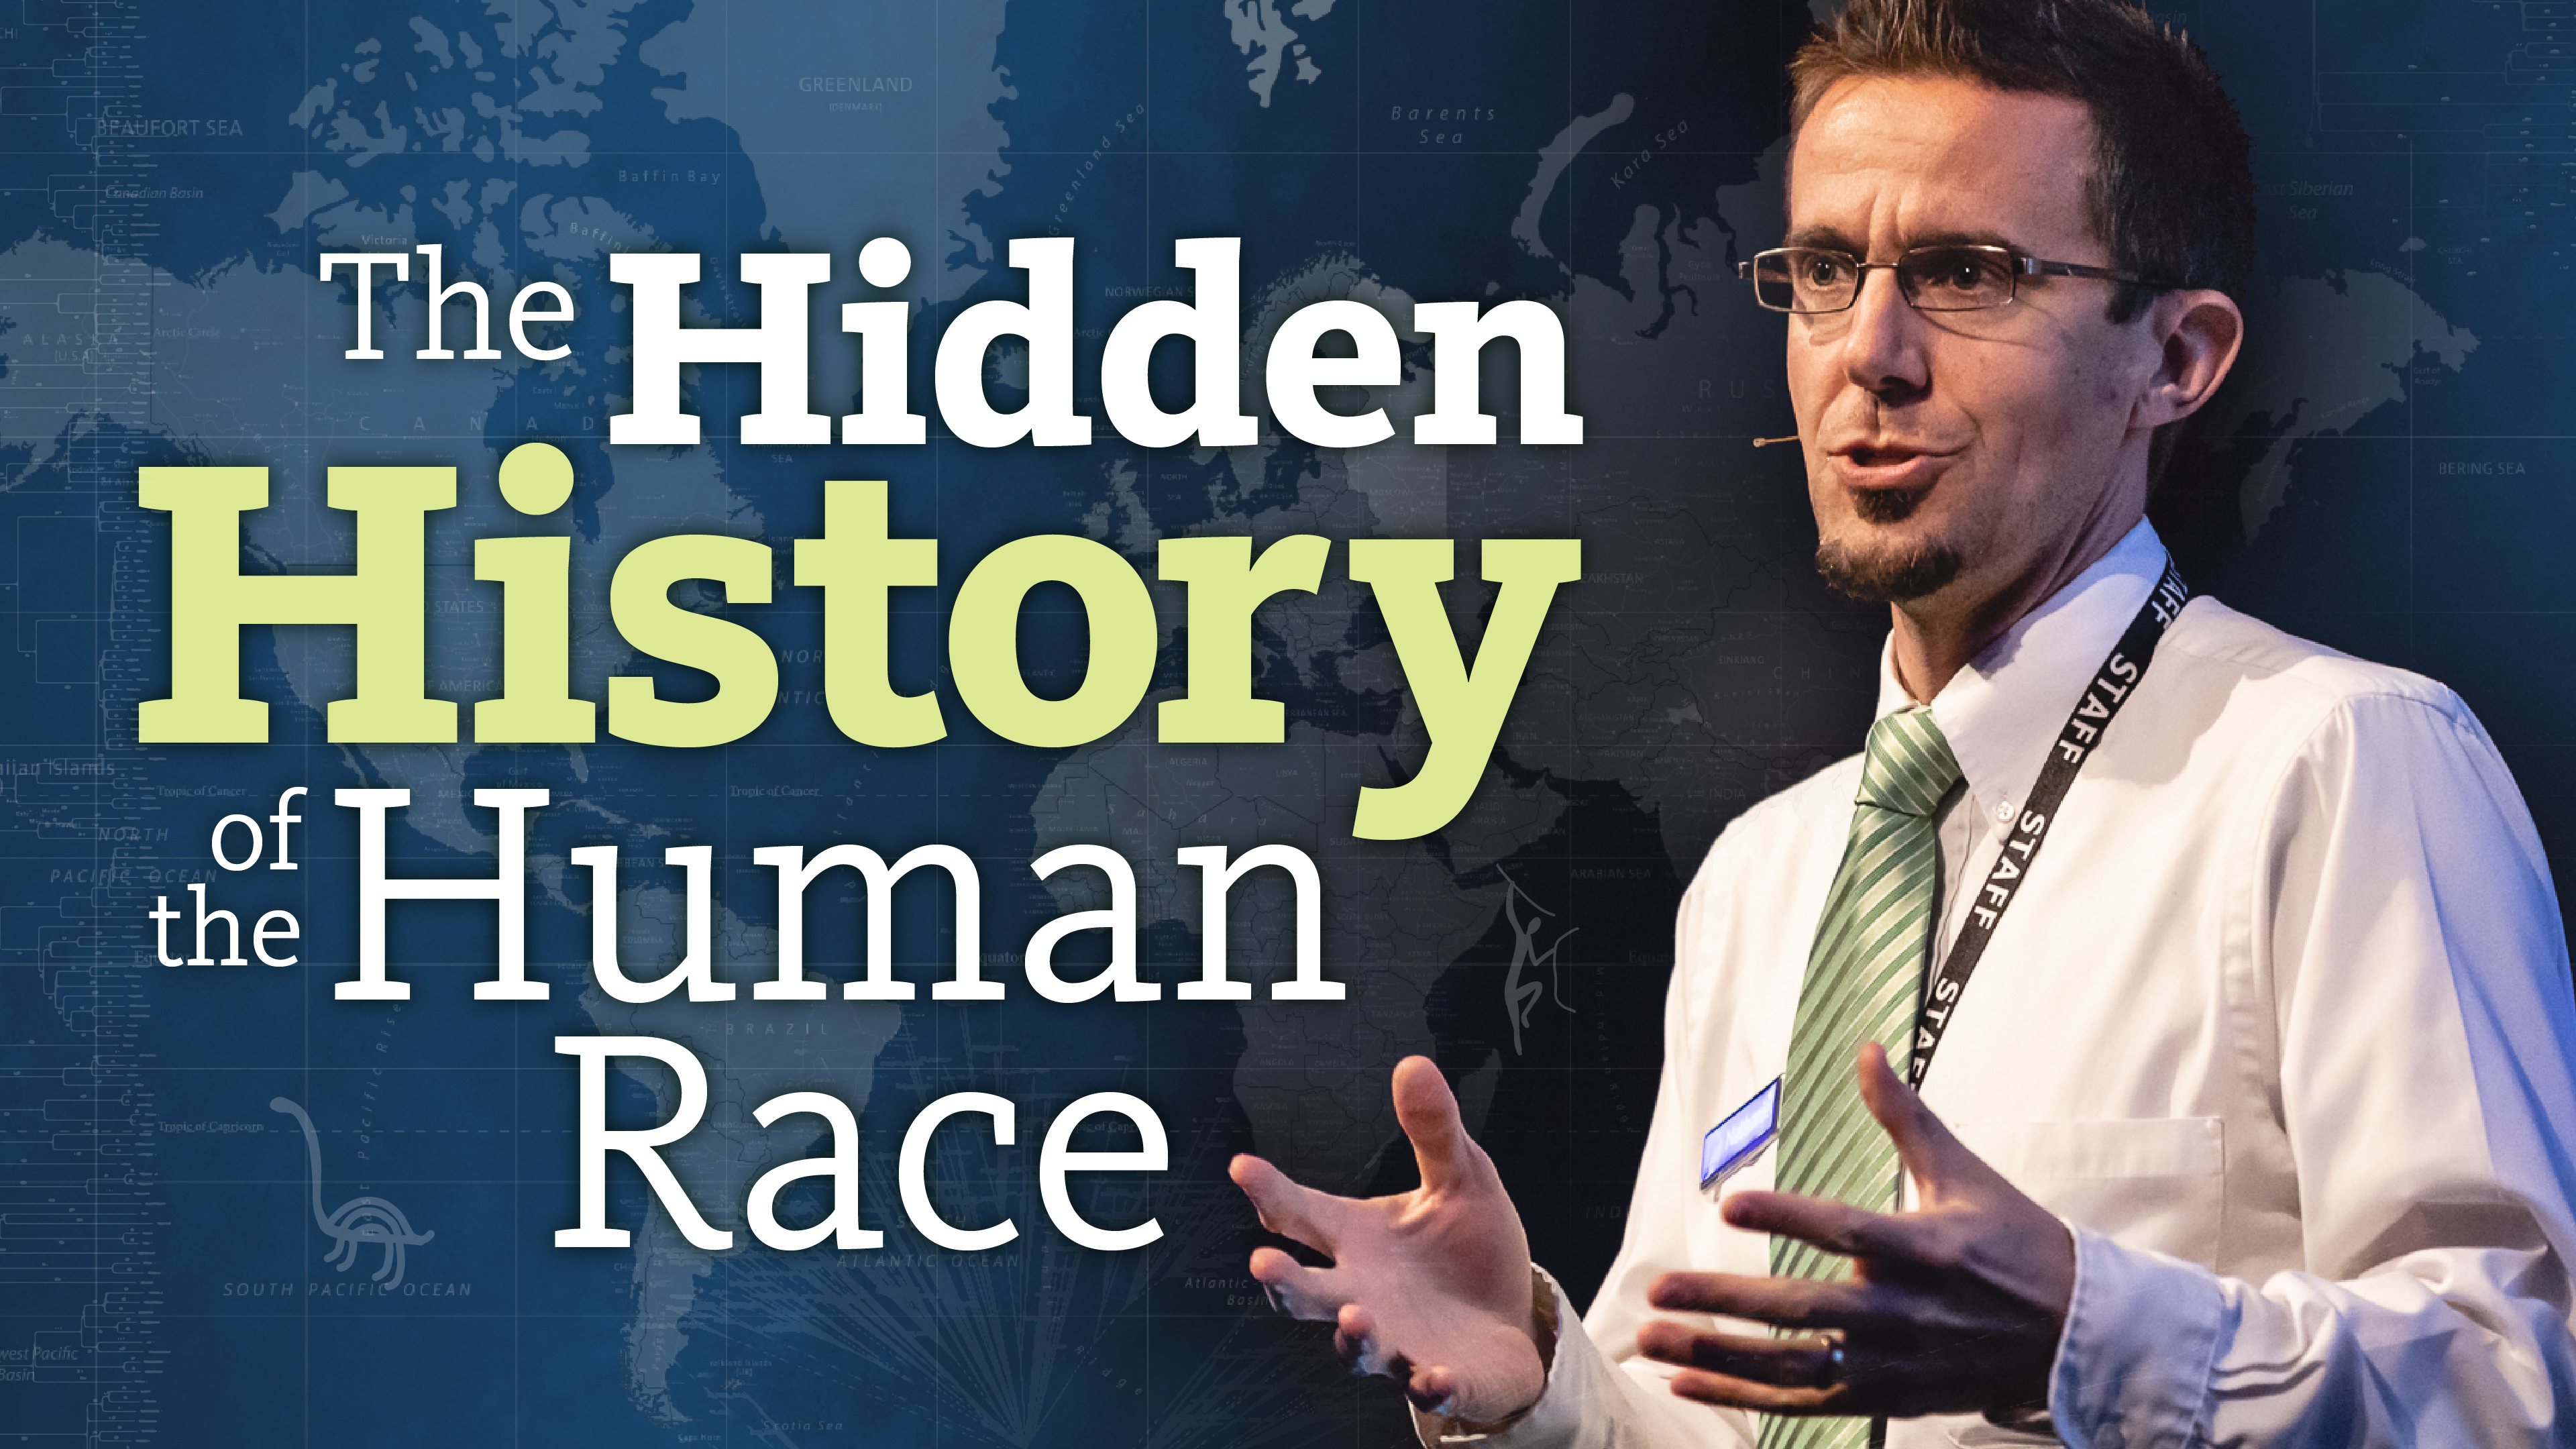 The Hidden History of the Human Race by Michael A. Cremo